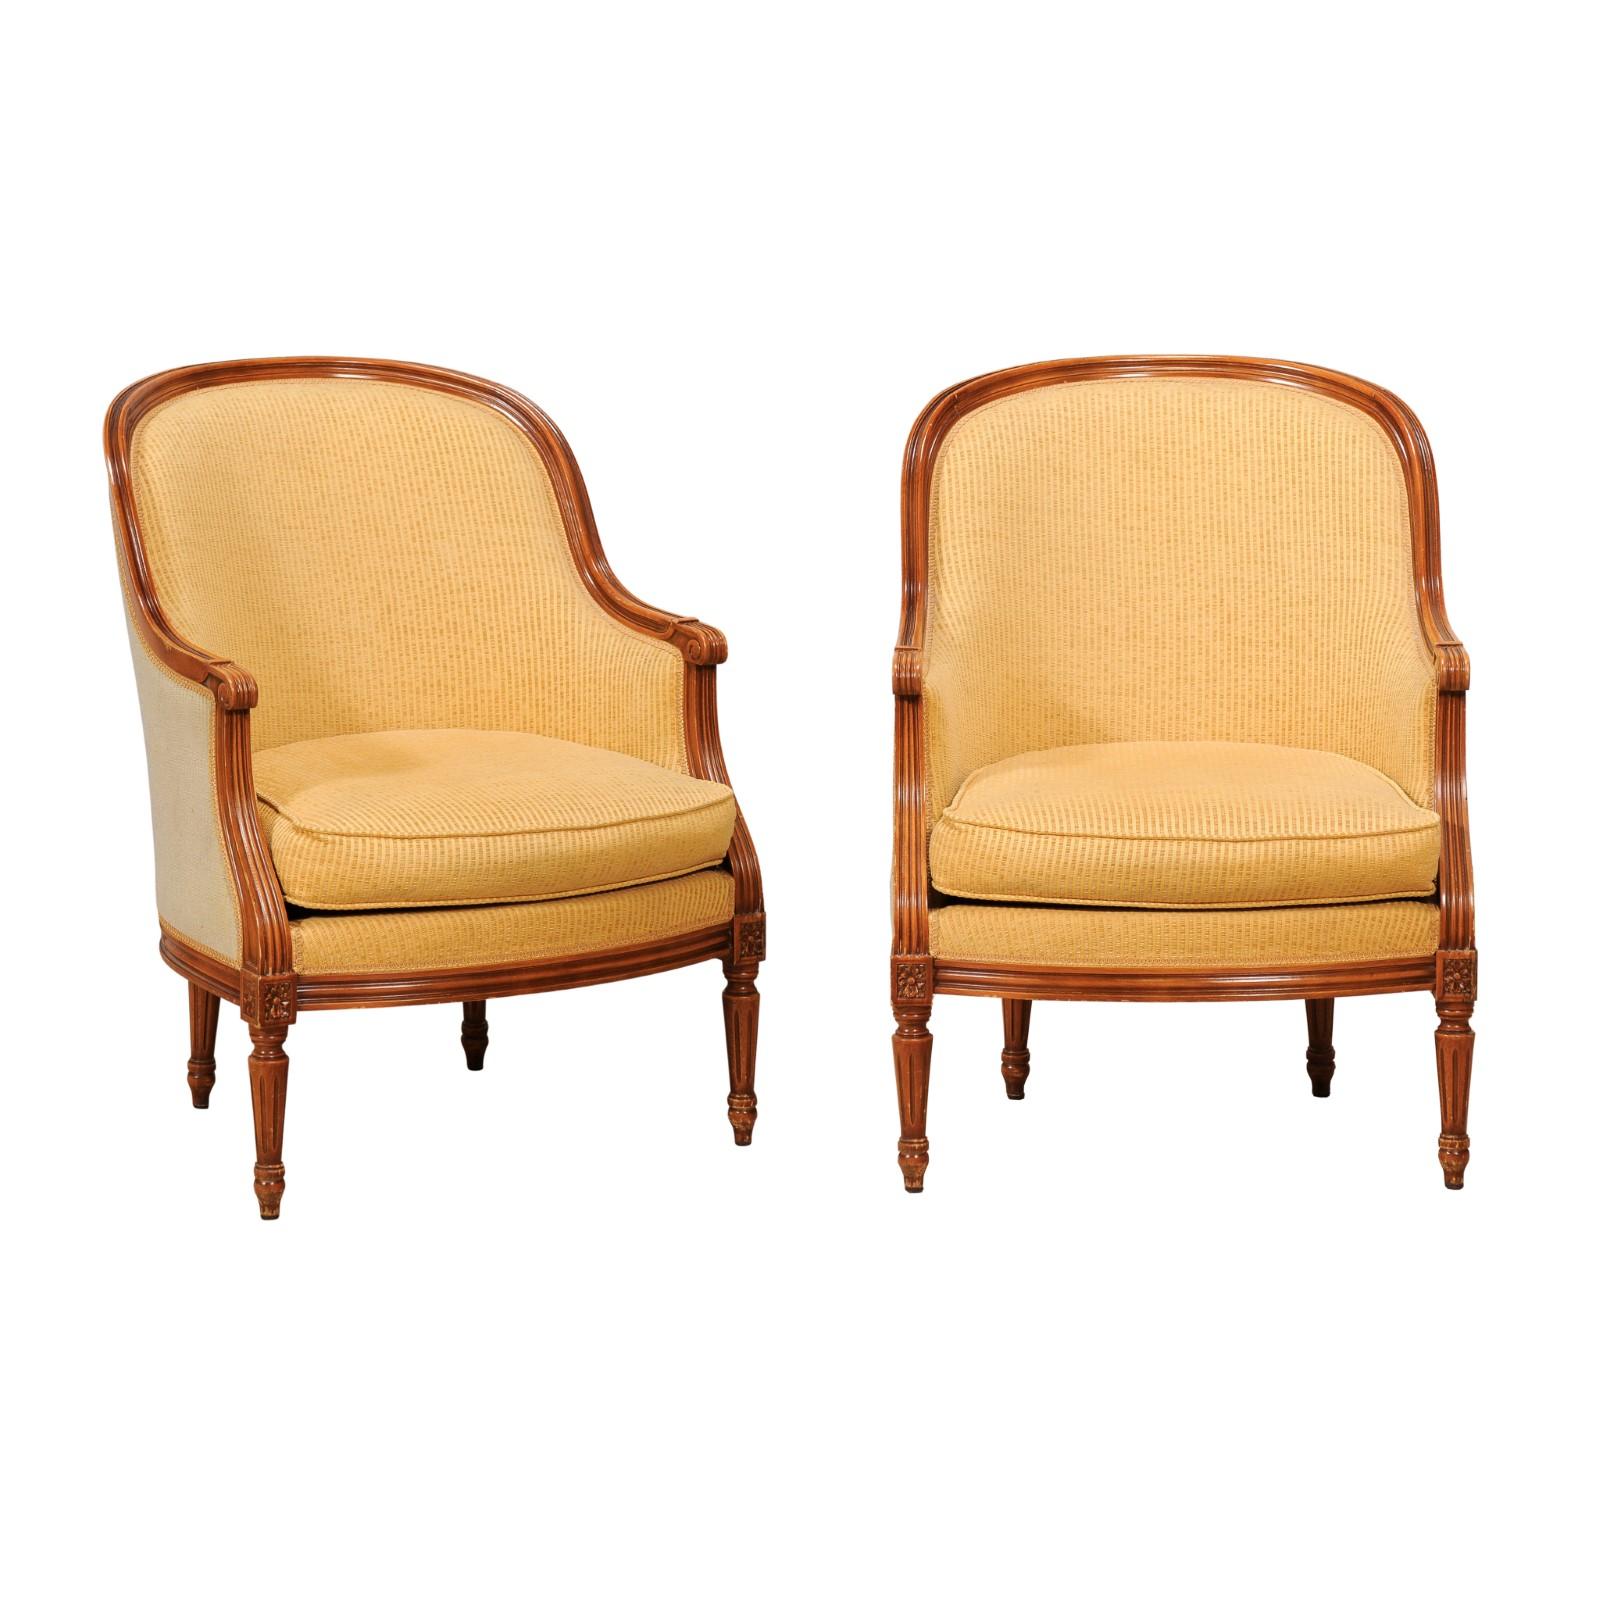 French Louis XVI Style Walnut Bergères Chairs with Wraparound Backs, Pair For Sale 11